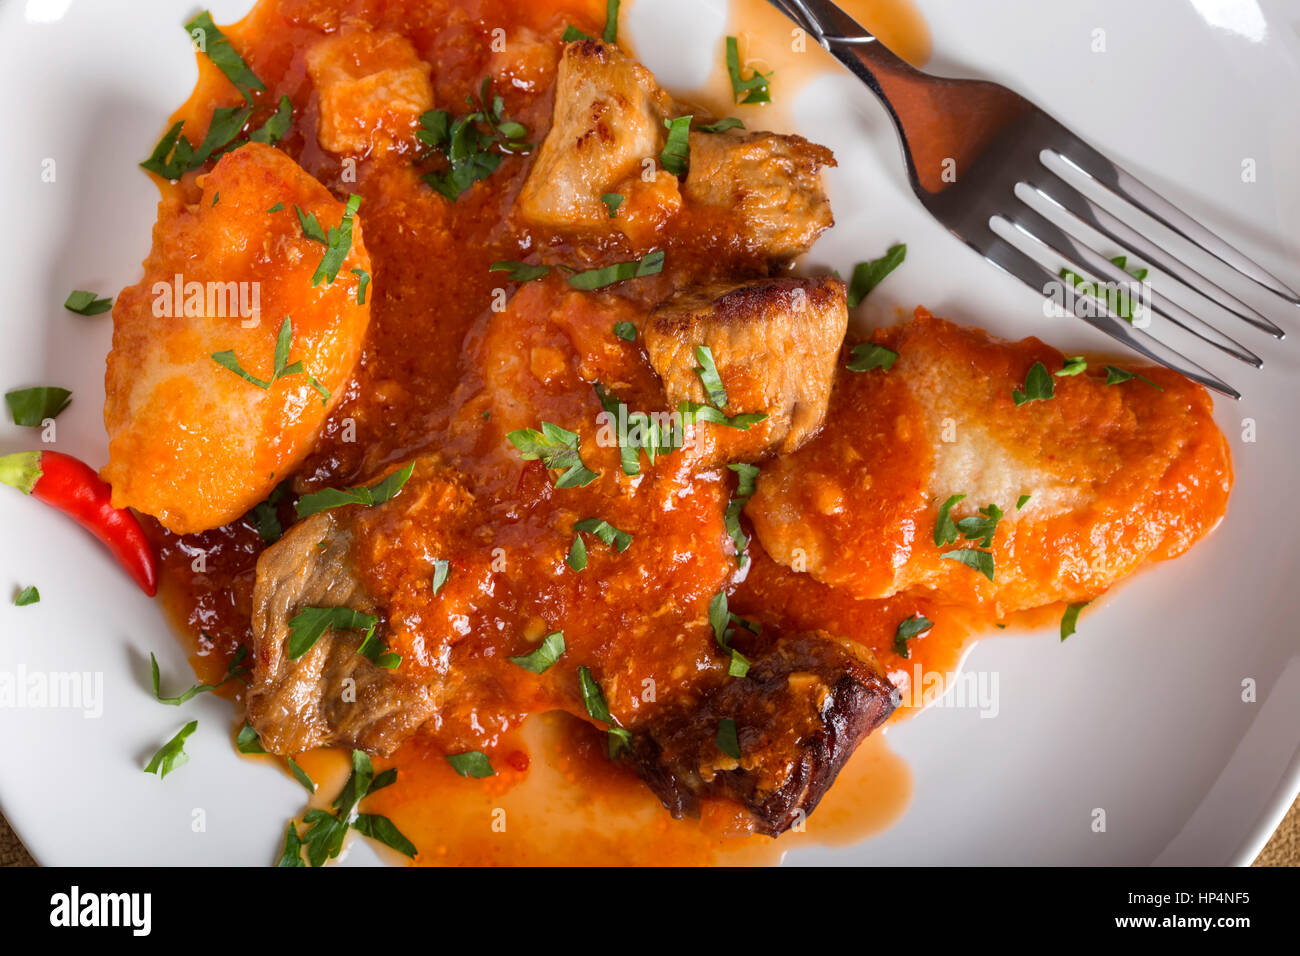 Goulash stew - hungarian traditional meal on plate with fork Stock Photo